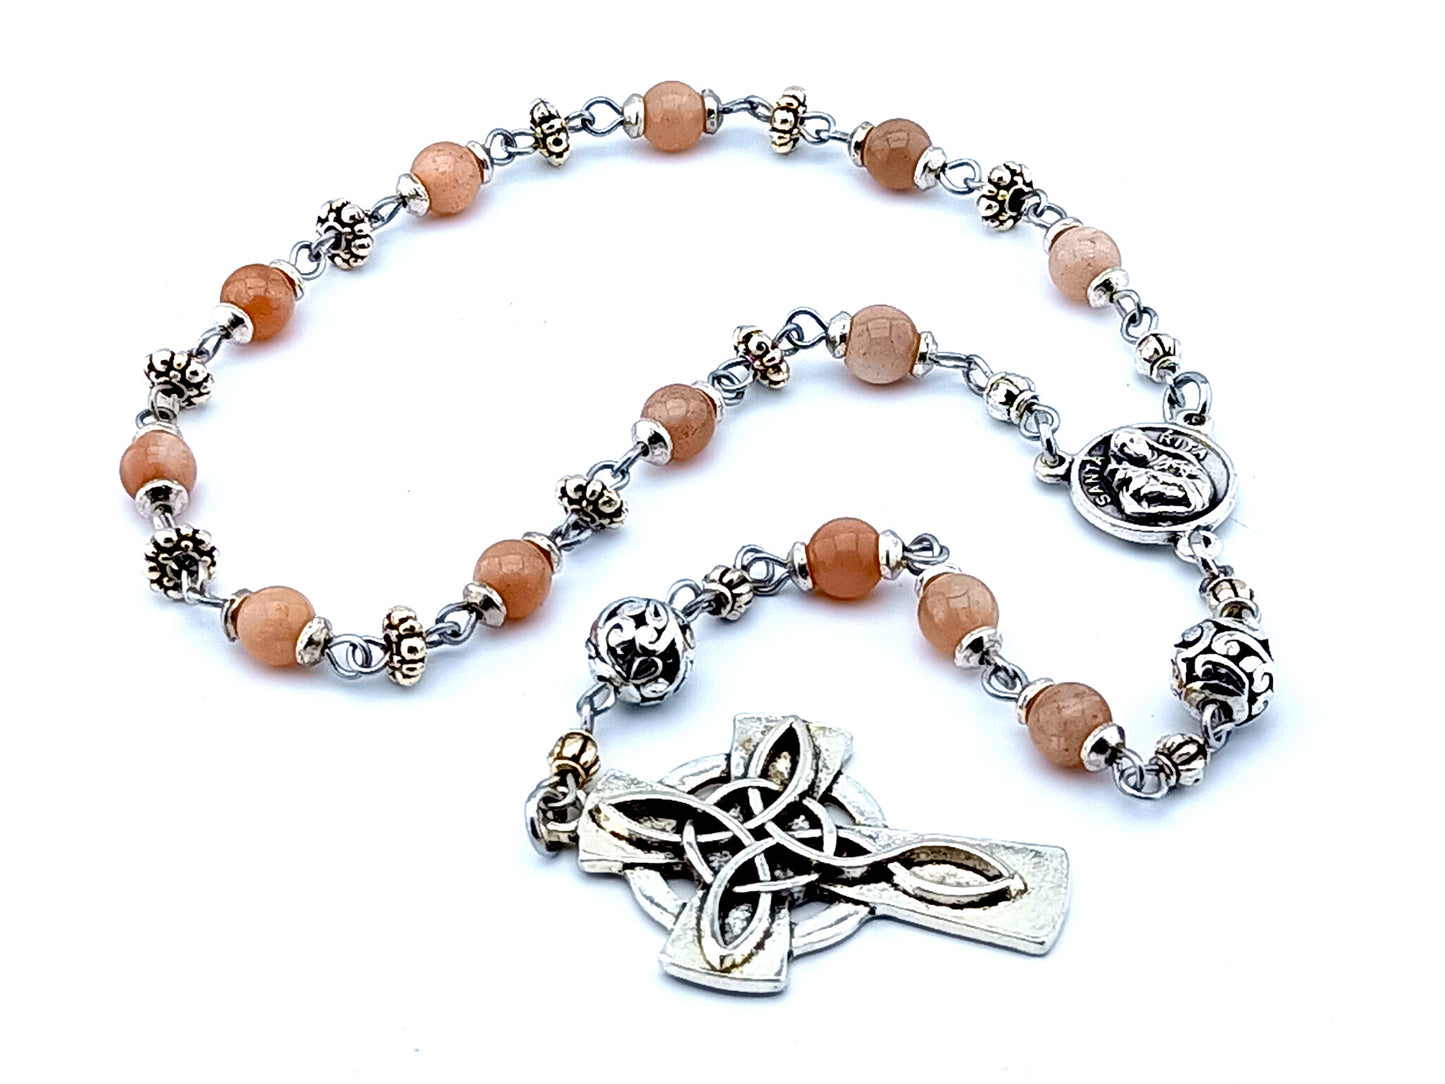 Saint Rita unique rosary beads gemstone single decade rosary beads with Celtic cross and rose center medal.